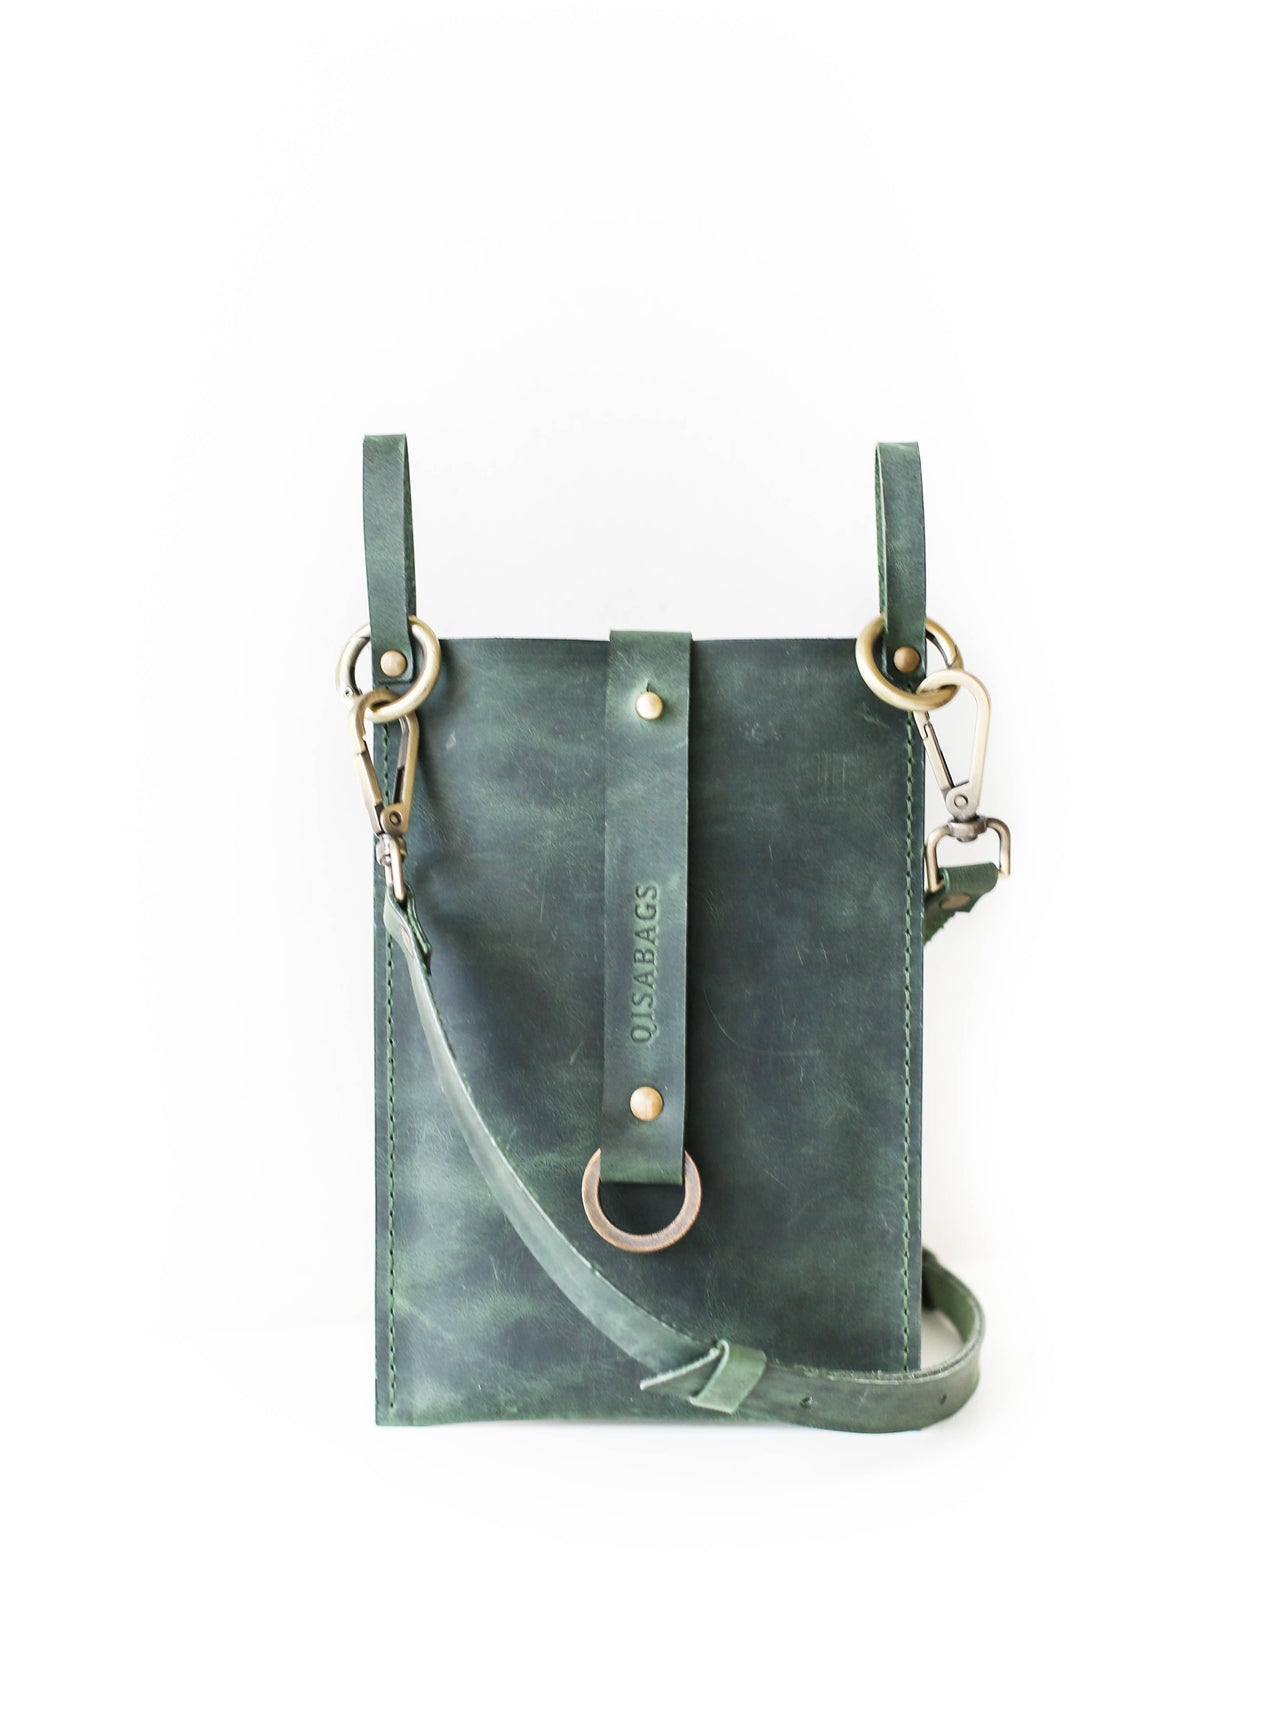 New this season - Small Leather Goods